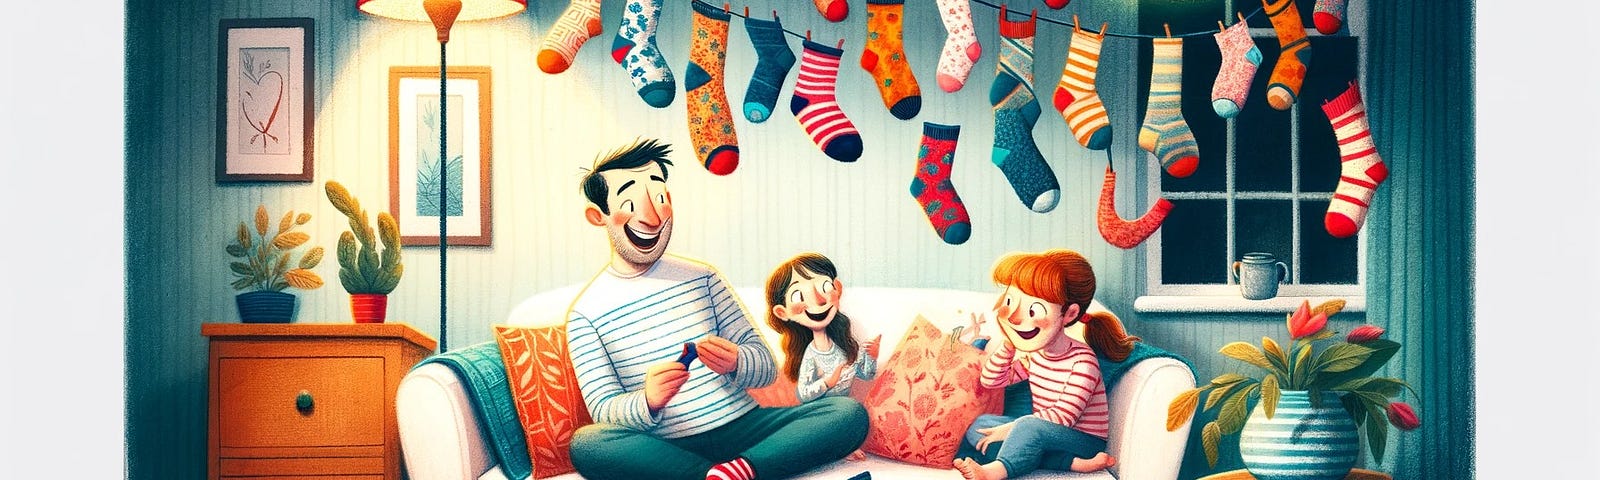 Cozy living room with a family laughing among whimsically scattered socks, depicting the fun in everyday household mysteries.